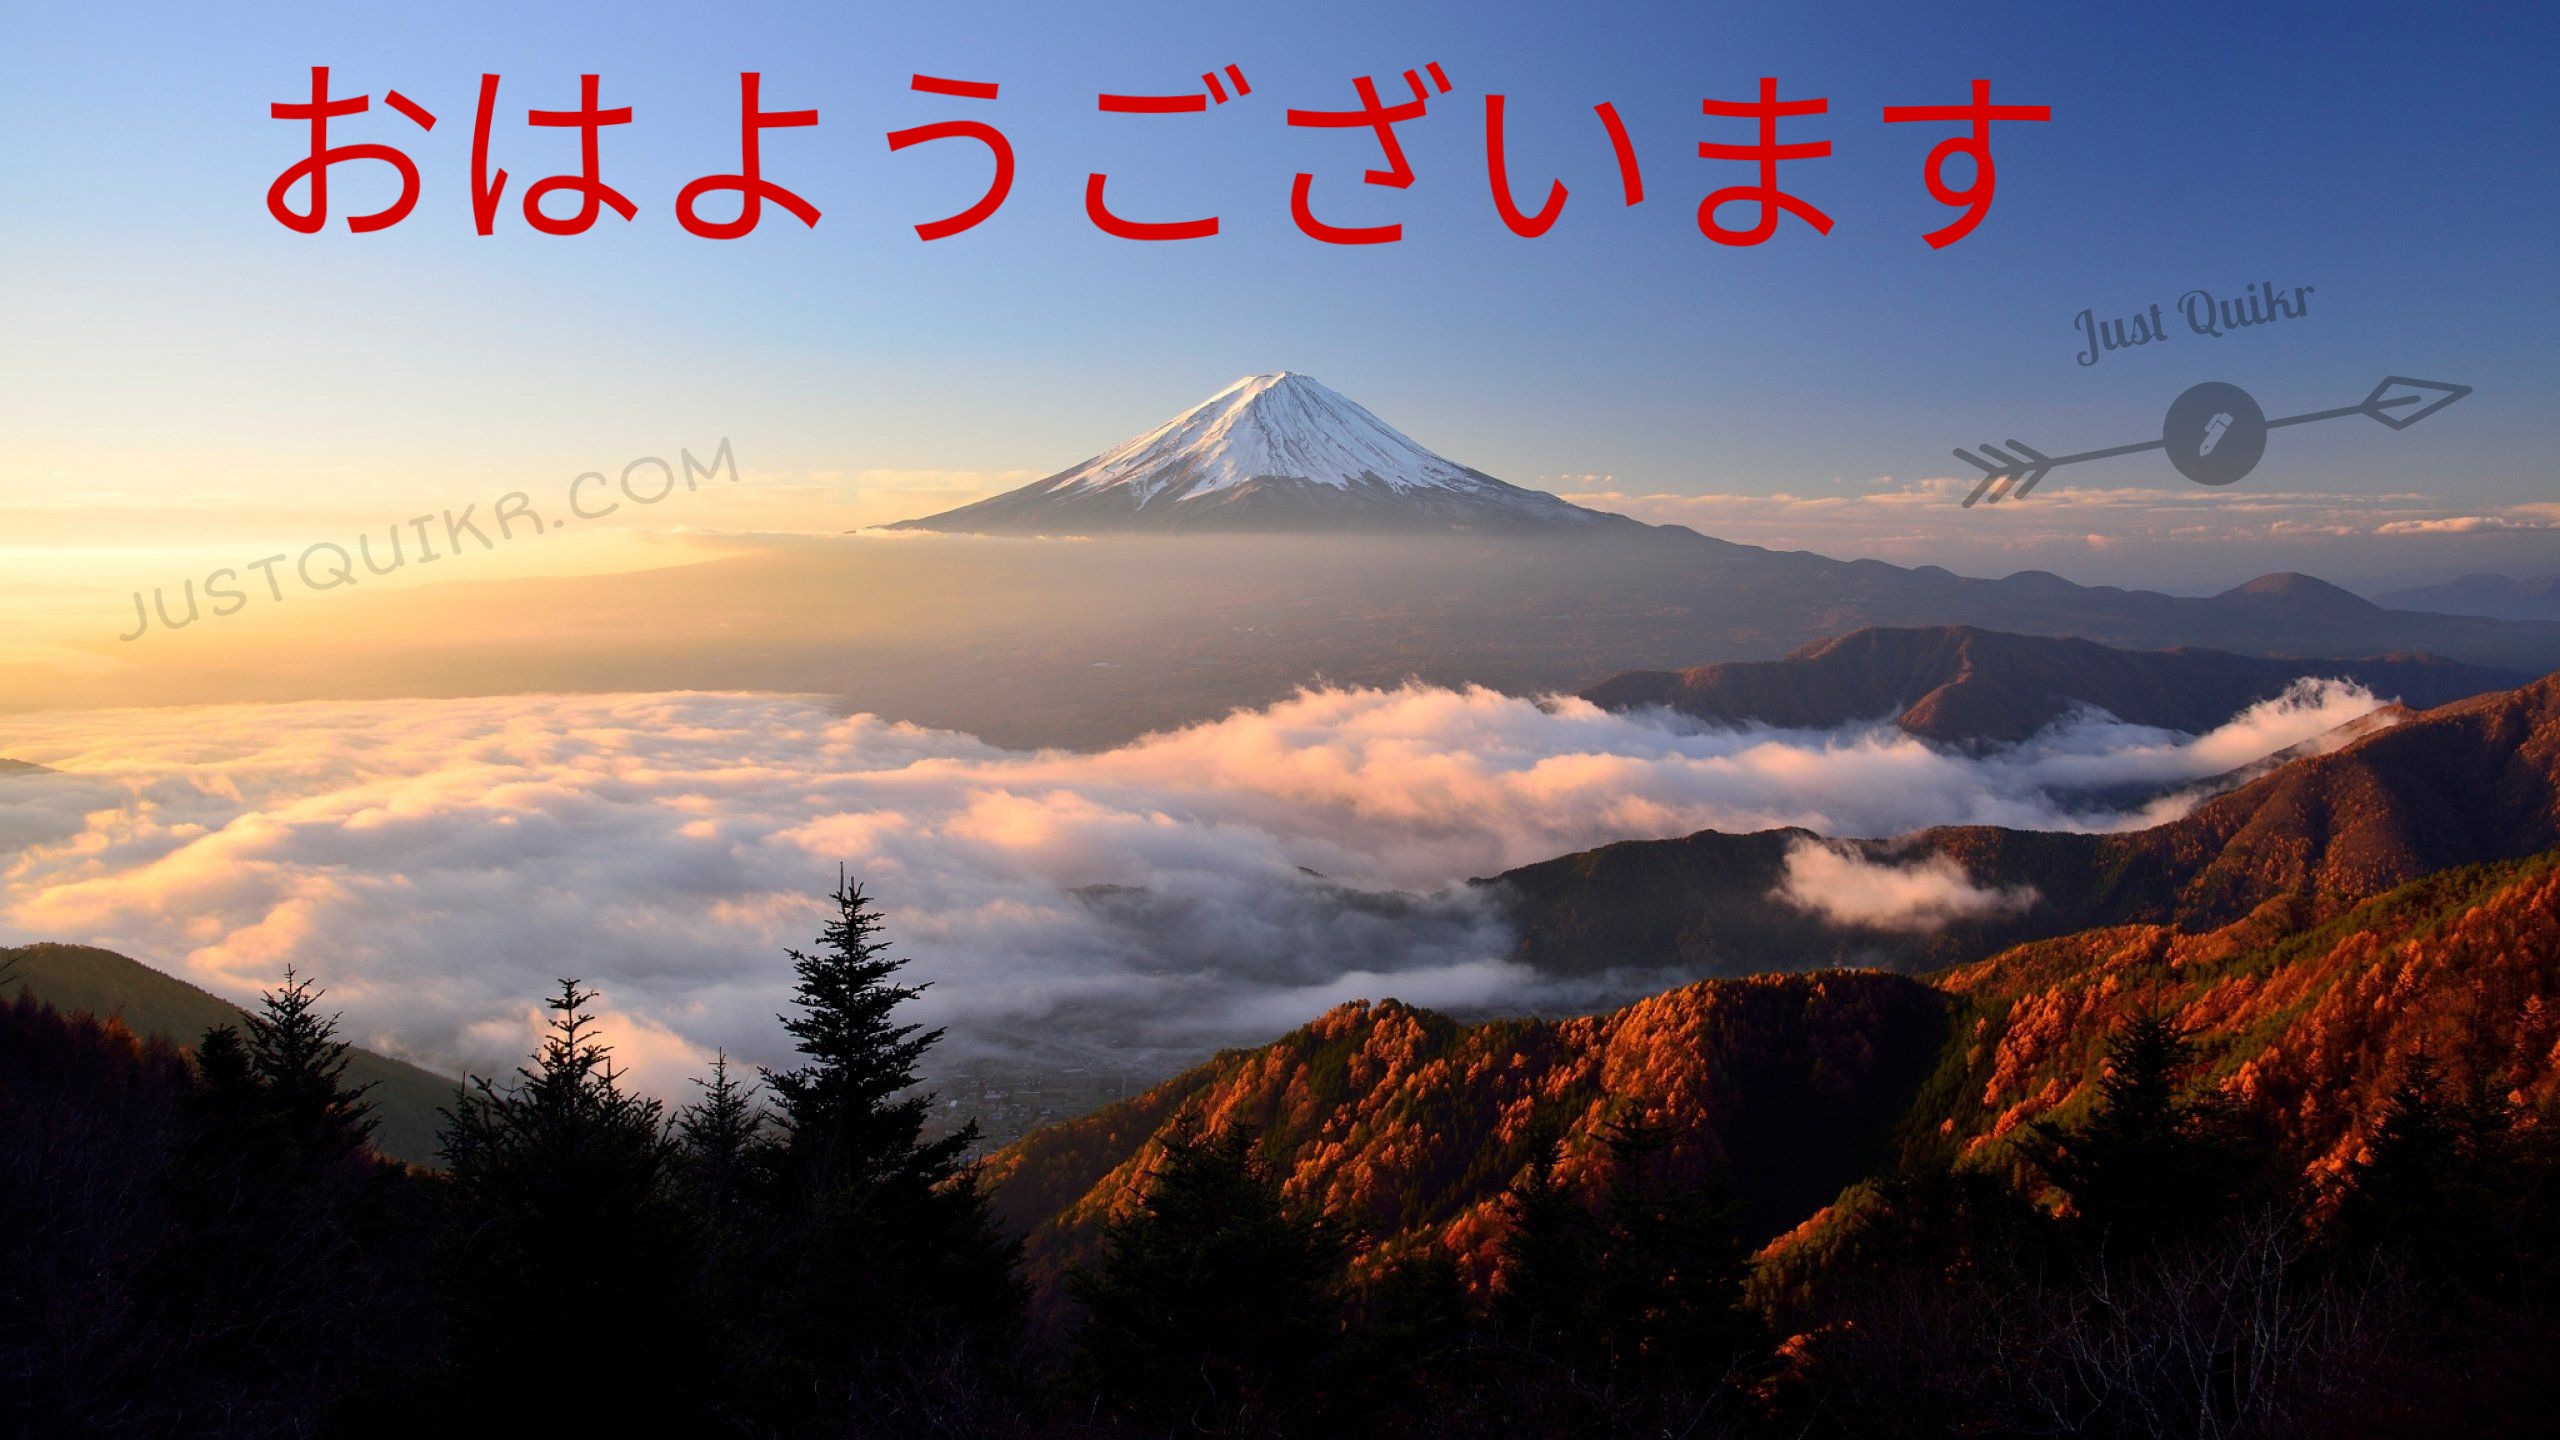 Good Morning Japanese Quotes Messages Wishes Shayari SMS HD Pics Images